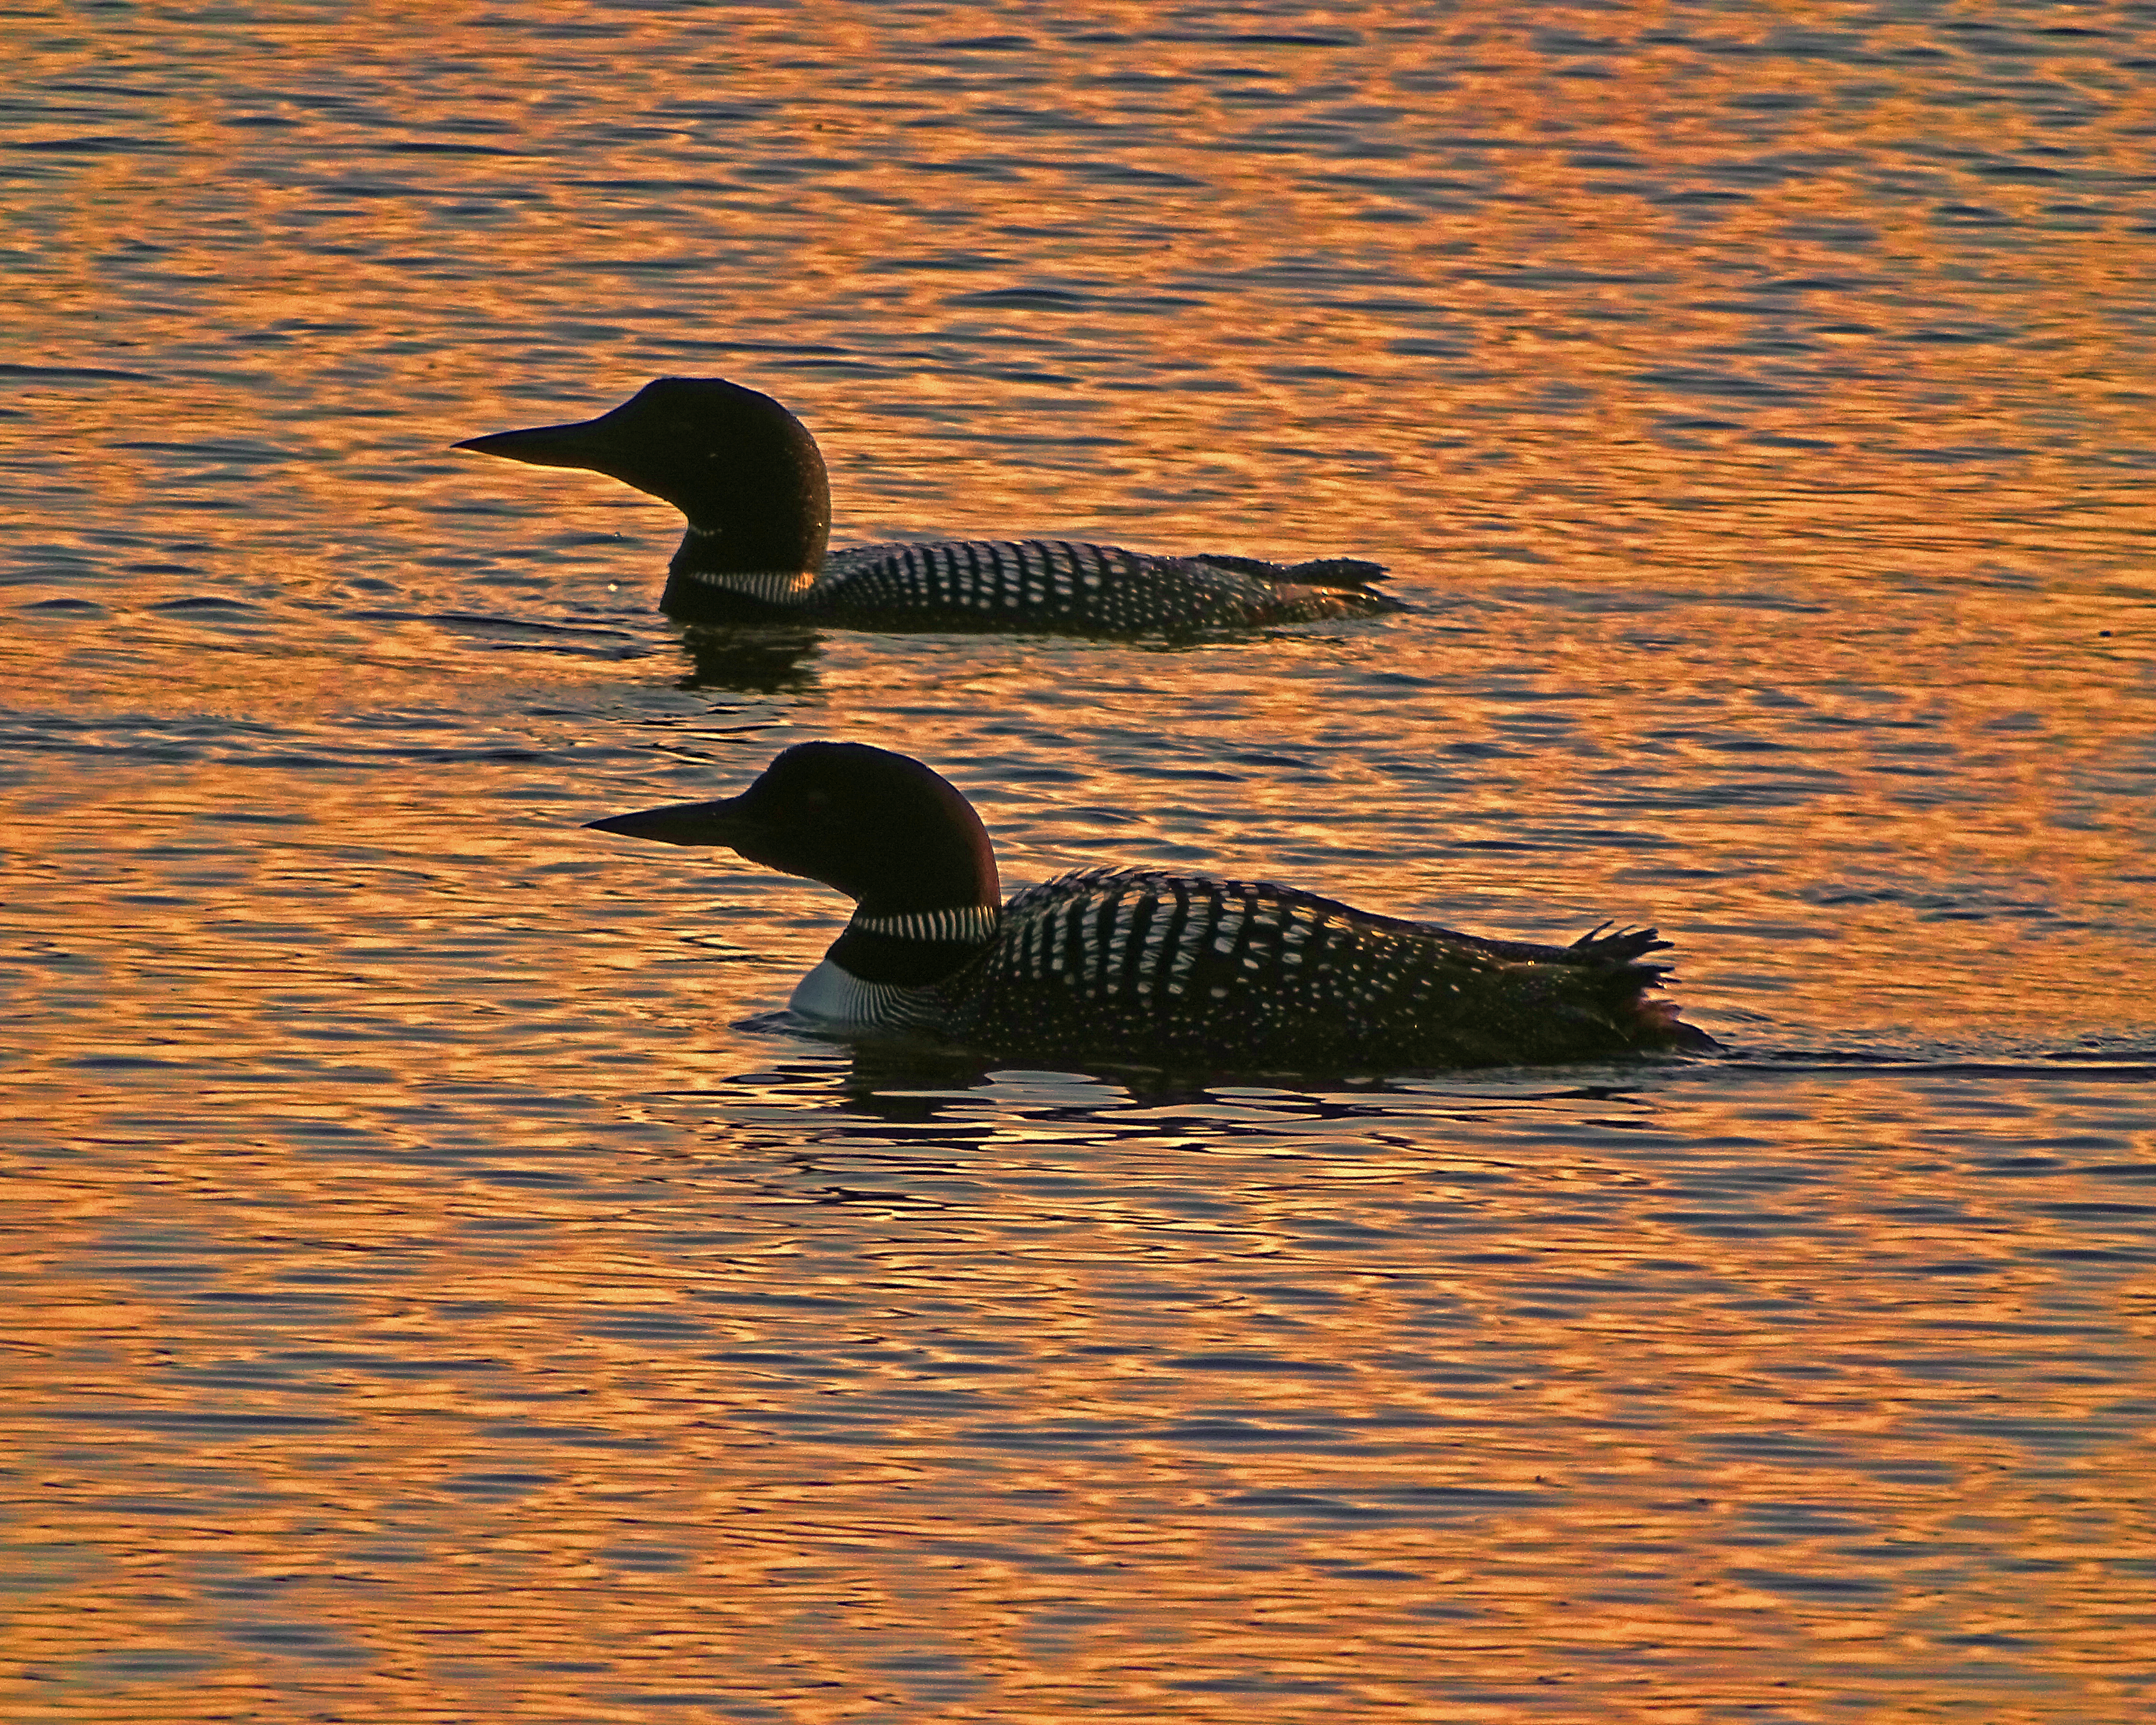 Two common loons silhouetted against water reflecting orange sunlight